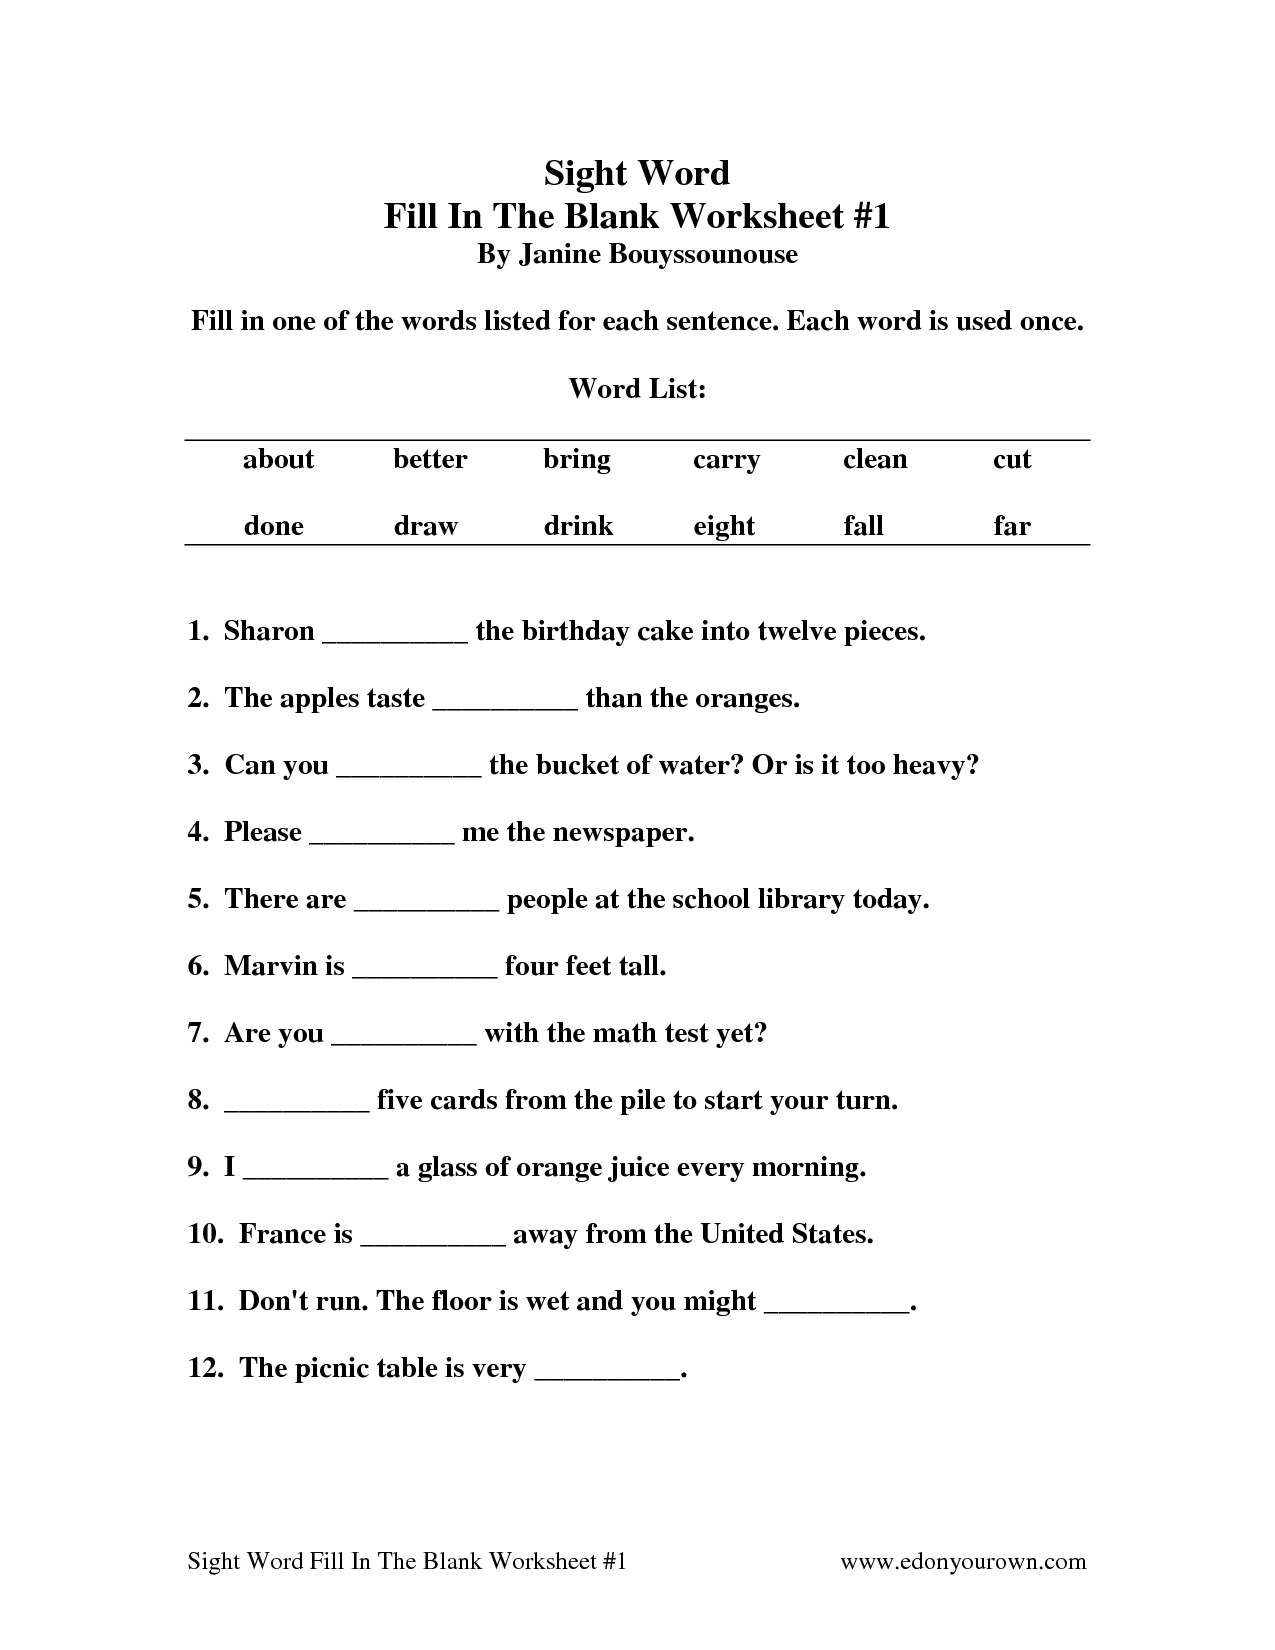 19-best-images-of-fill-in-the-blank-sight-word-worksheets-fill-in-blank-worksheets-sight-word